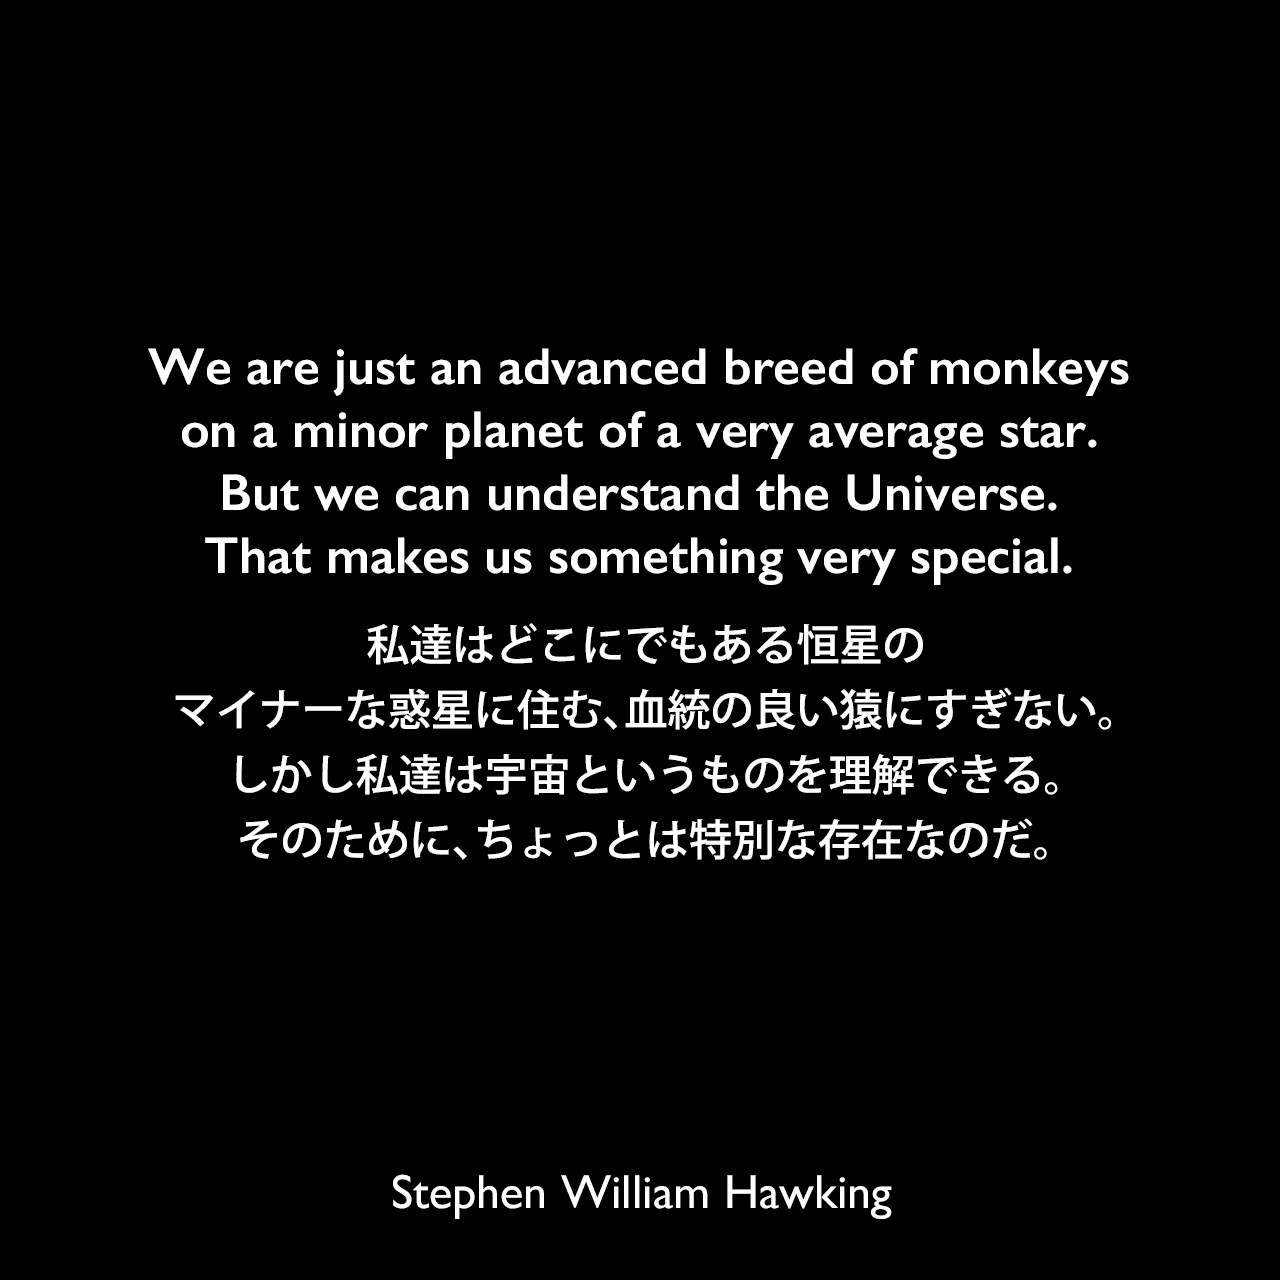 We are just an advanced breed of monkeys on a minor planet of a very average star. But we can understand the Universe. That makes us something very special.私達はどこにでもある恒星の、マイナーな惑星に住む、血統の良い猿にすぎない。しかし私達は宇宙というものを理解できる。そのために、ちょっとは特別な存在なのだ。- 1988年、ドイツの週刊誌「デア・シュピーゲル」よりStephen William Hawking